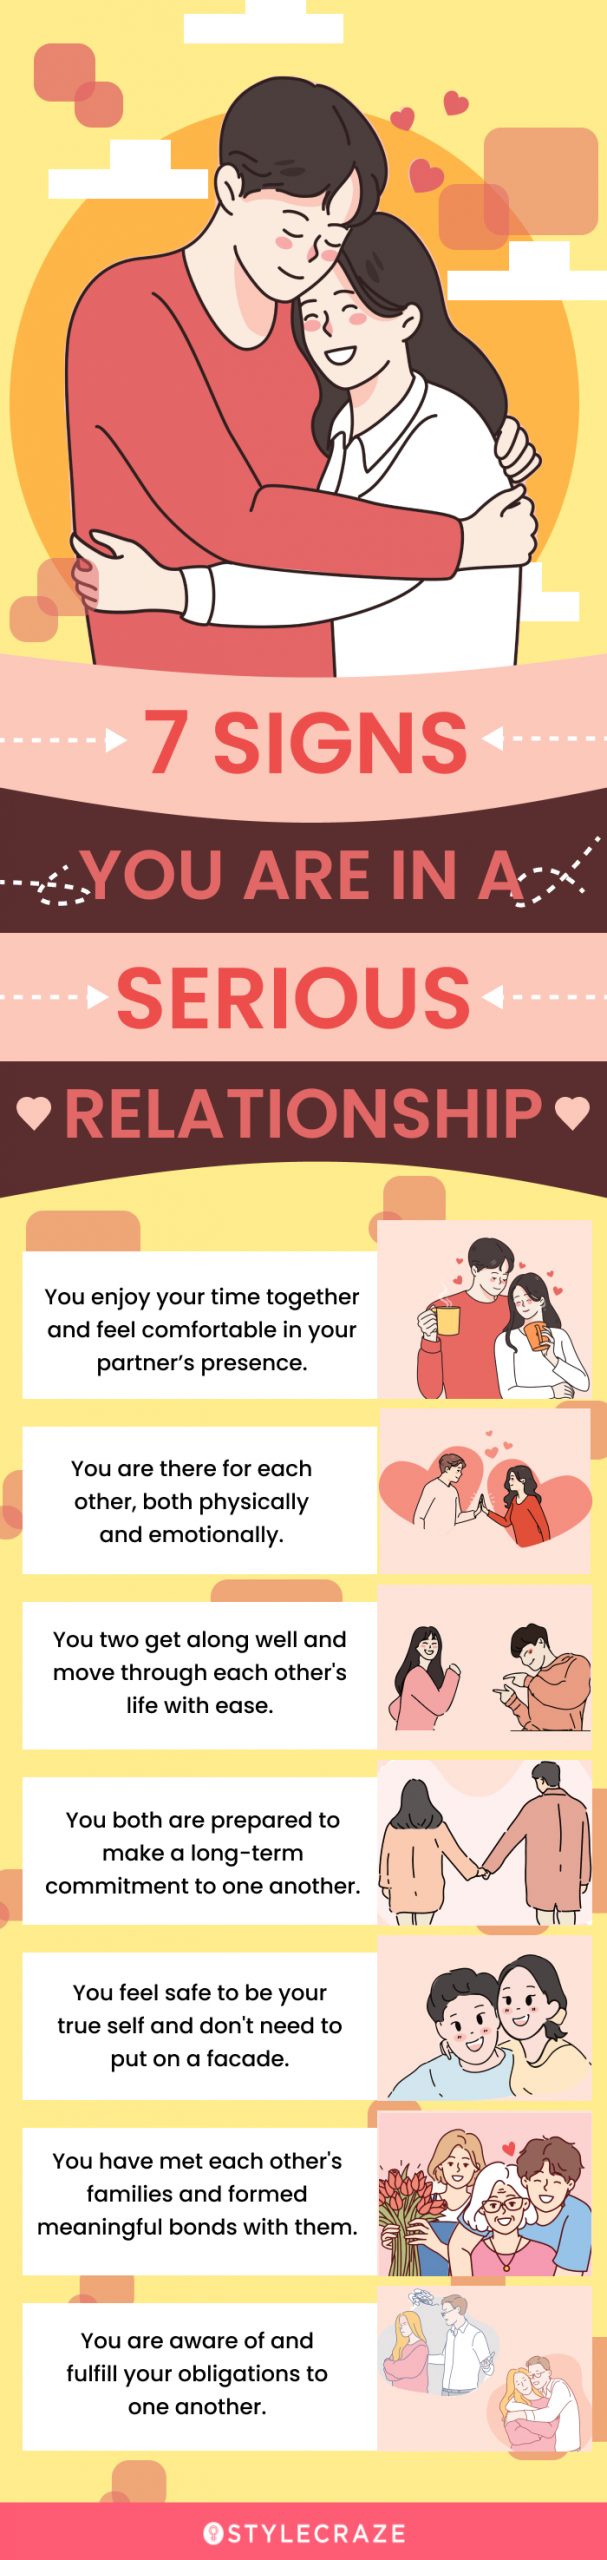 7 signs you are in a serious relationship (infographic)